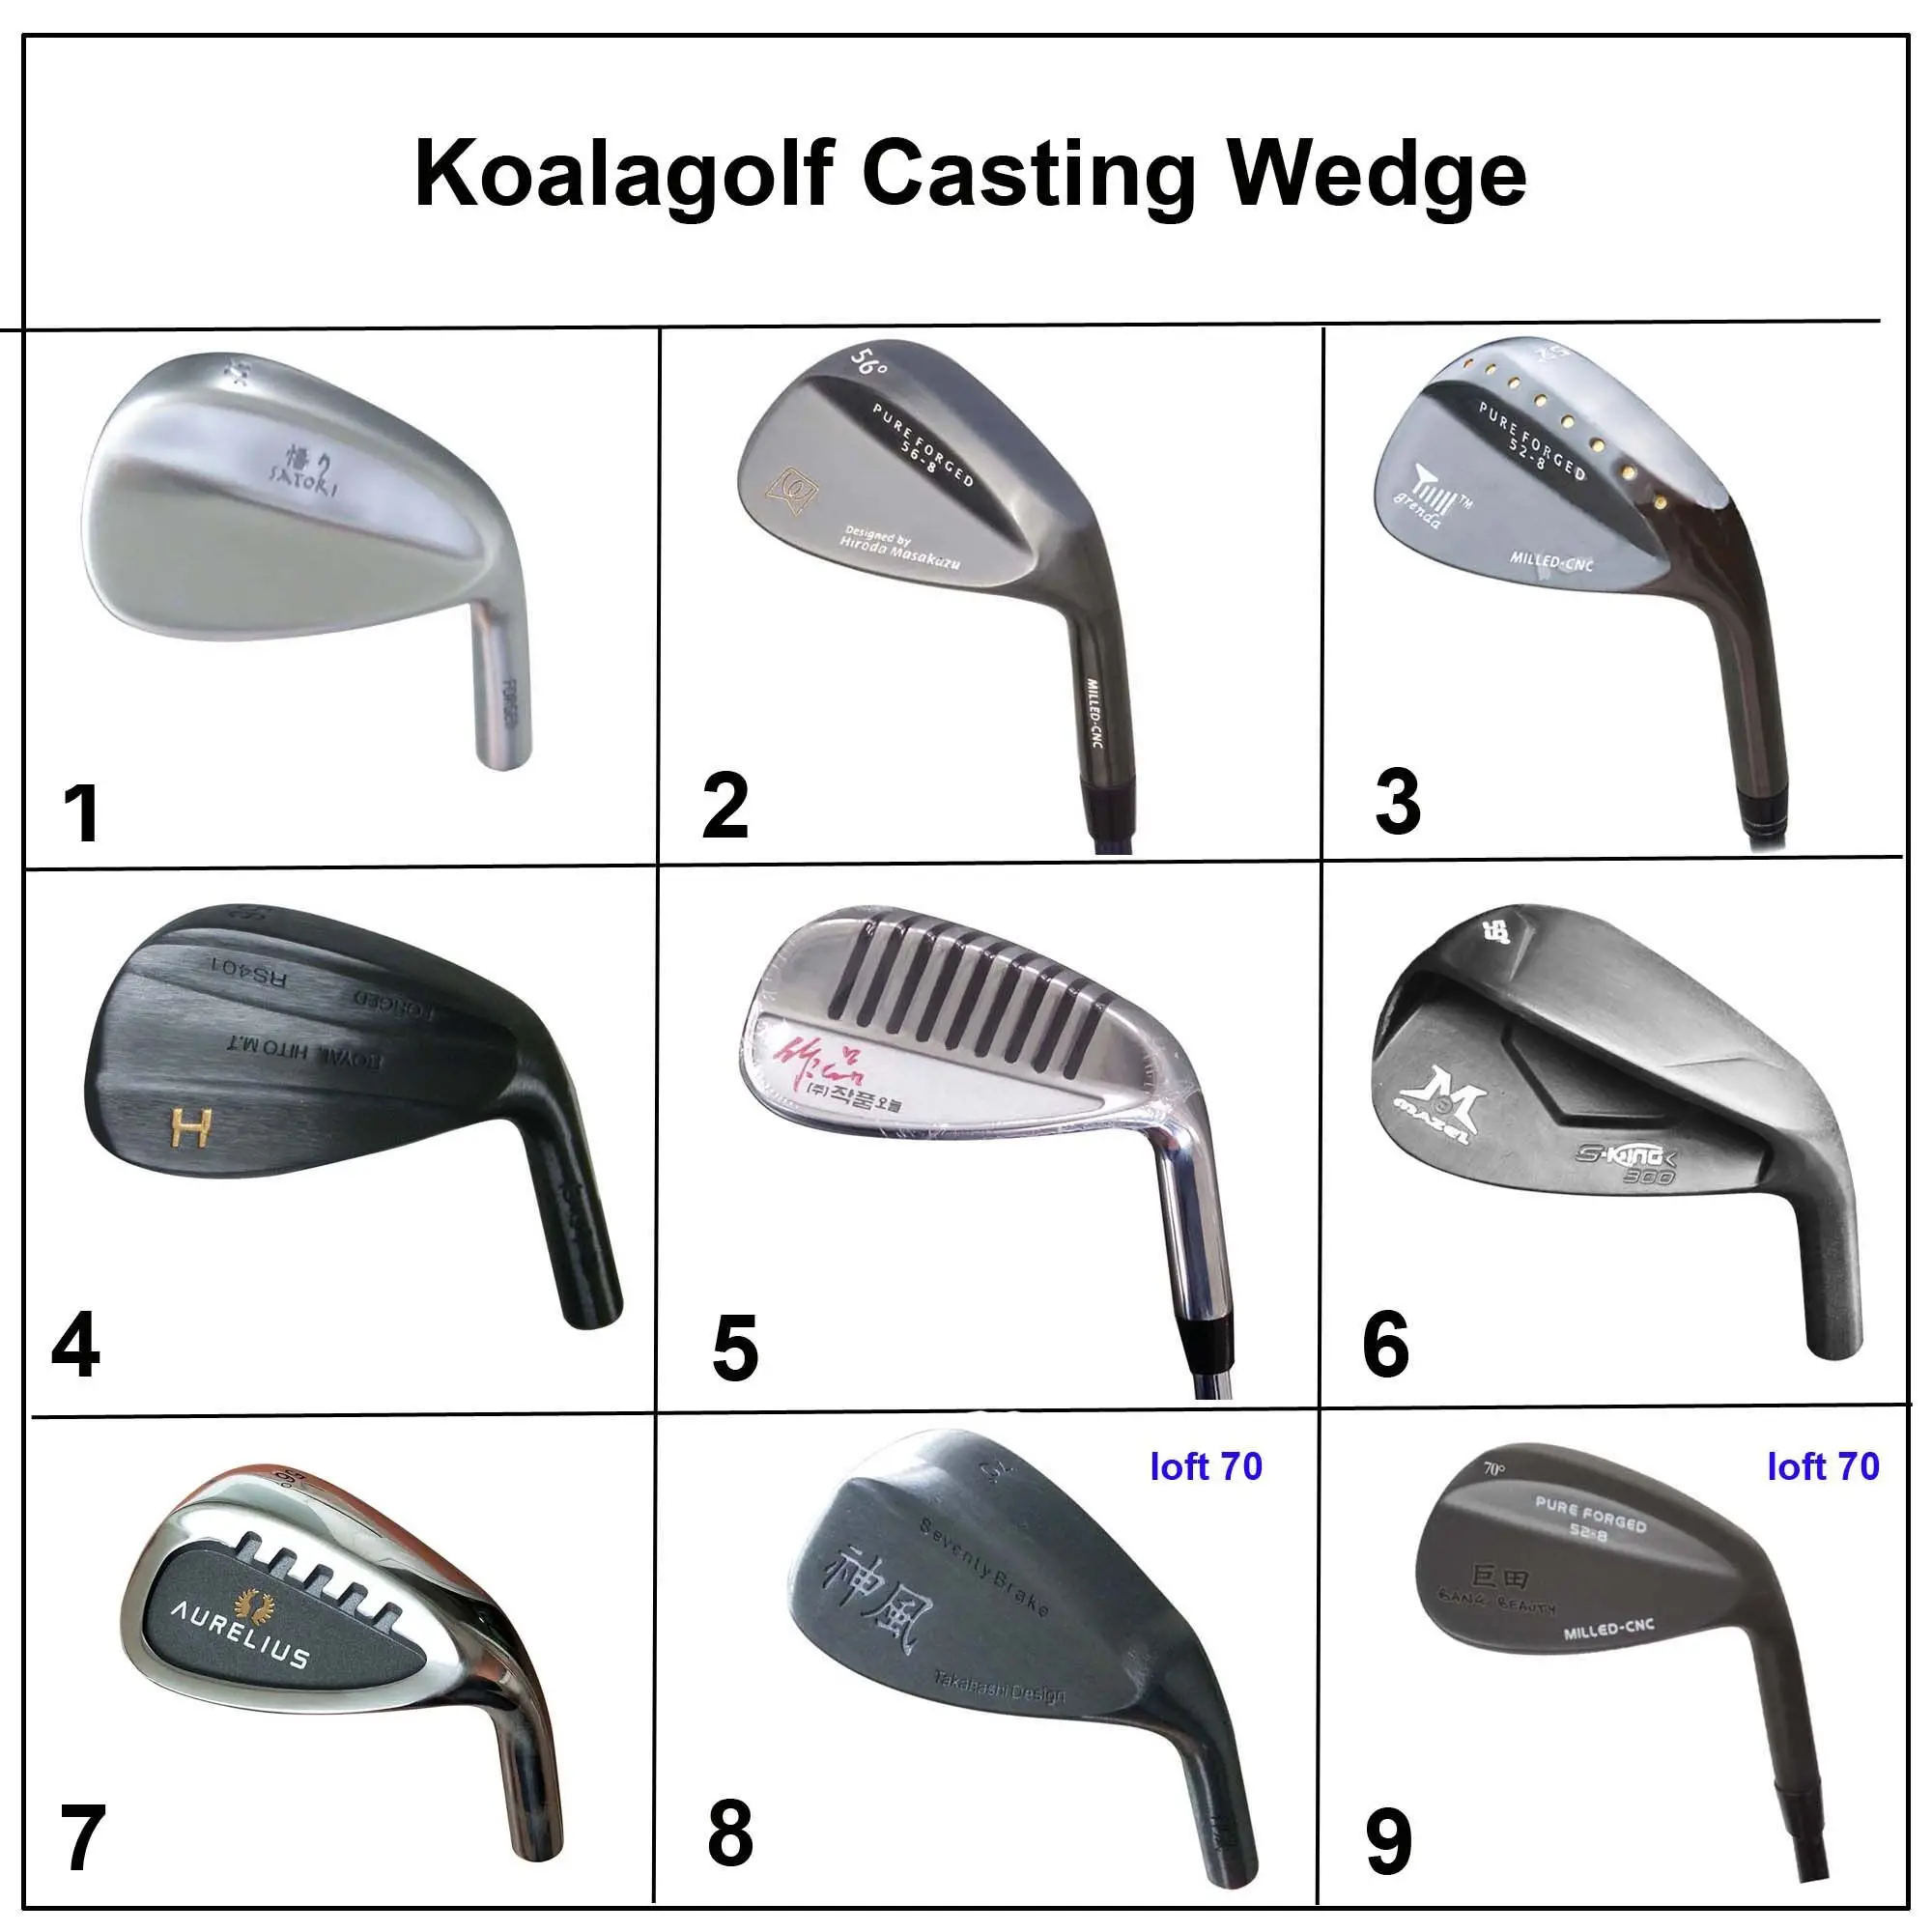 Casting wedges